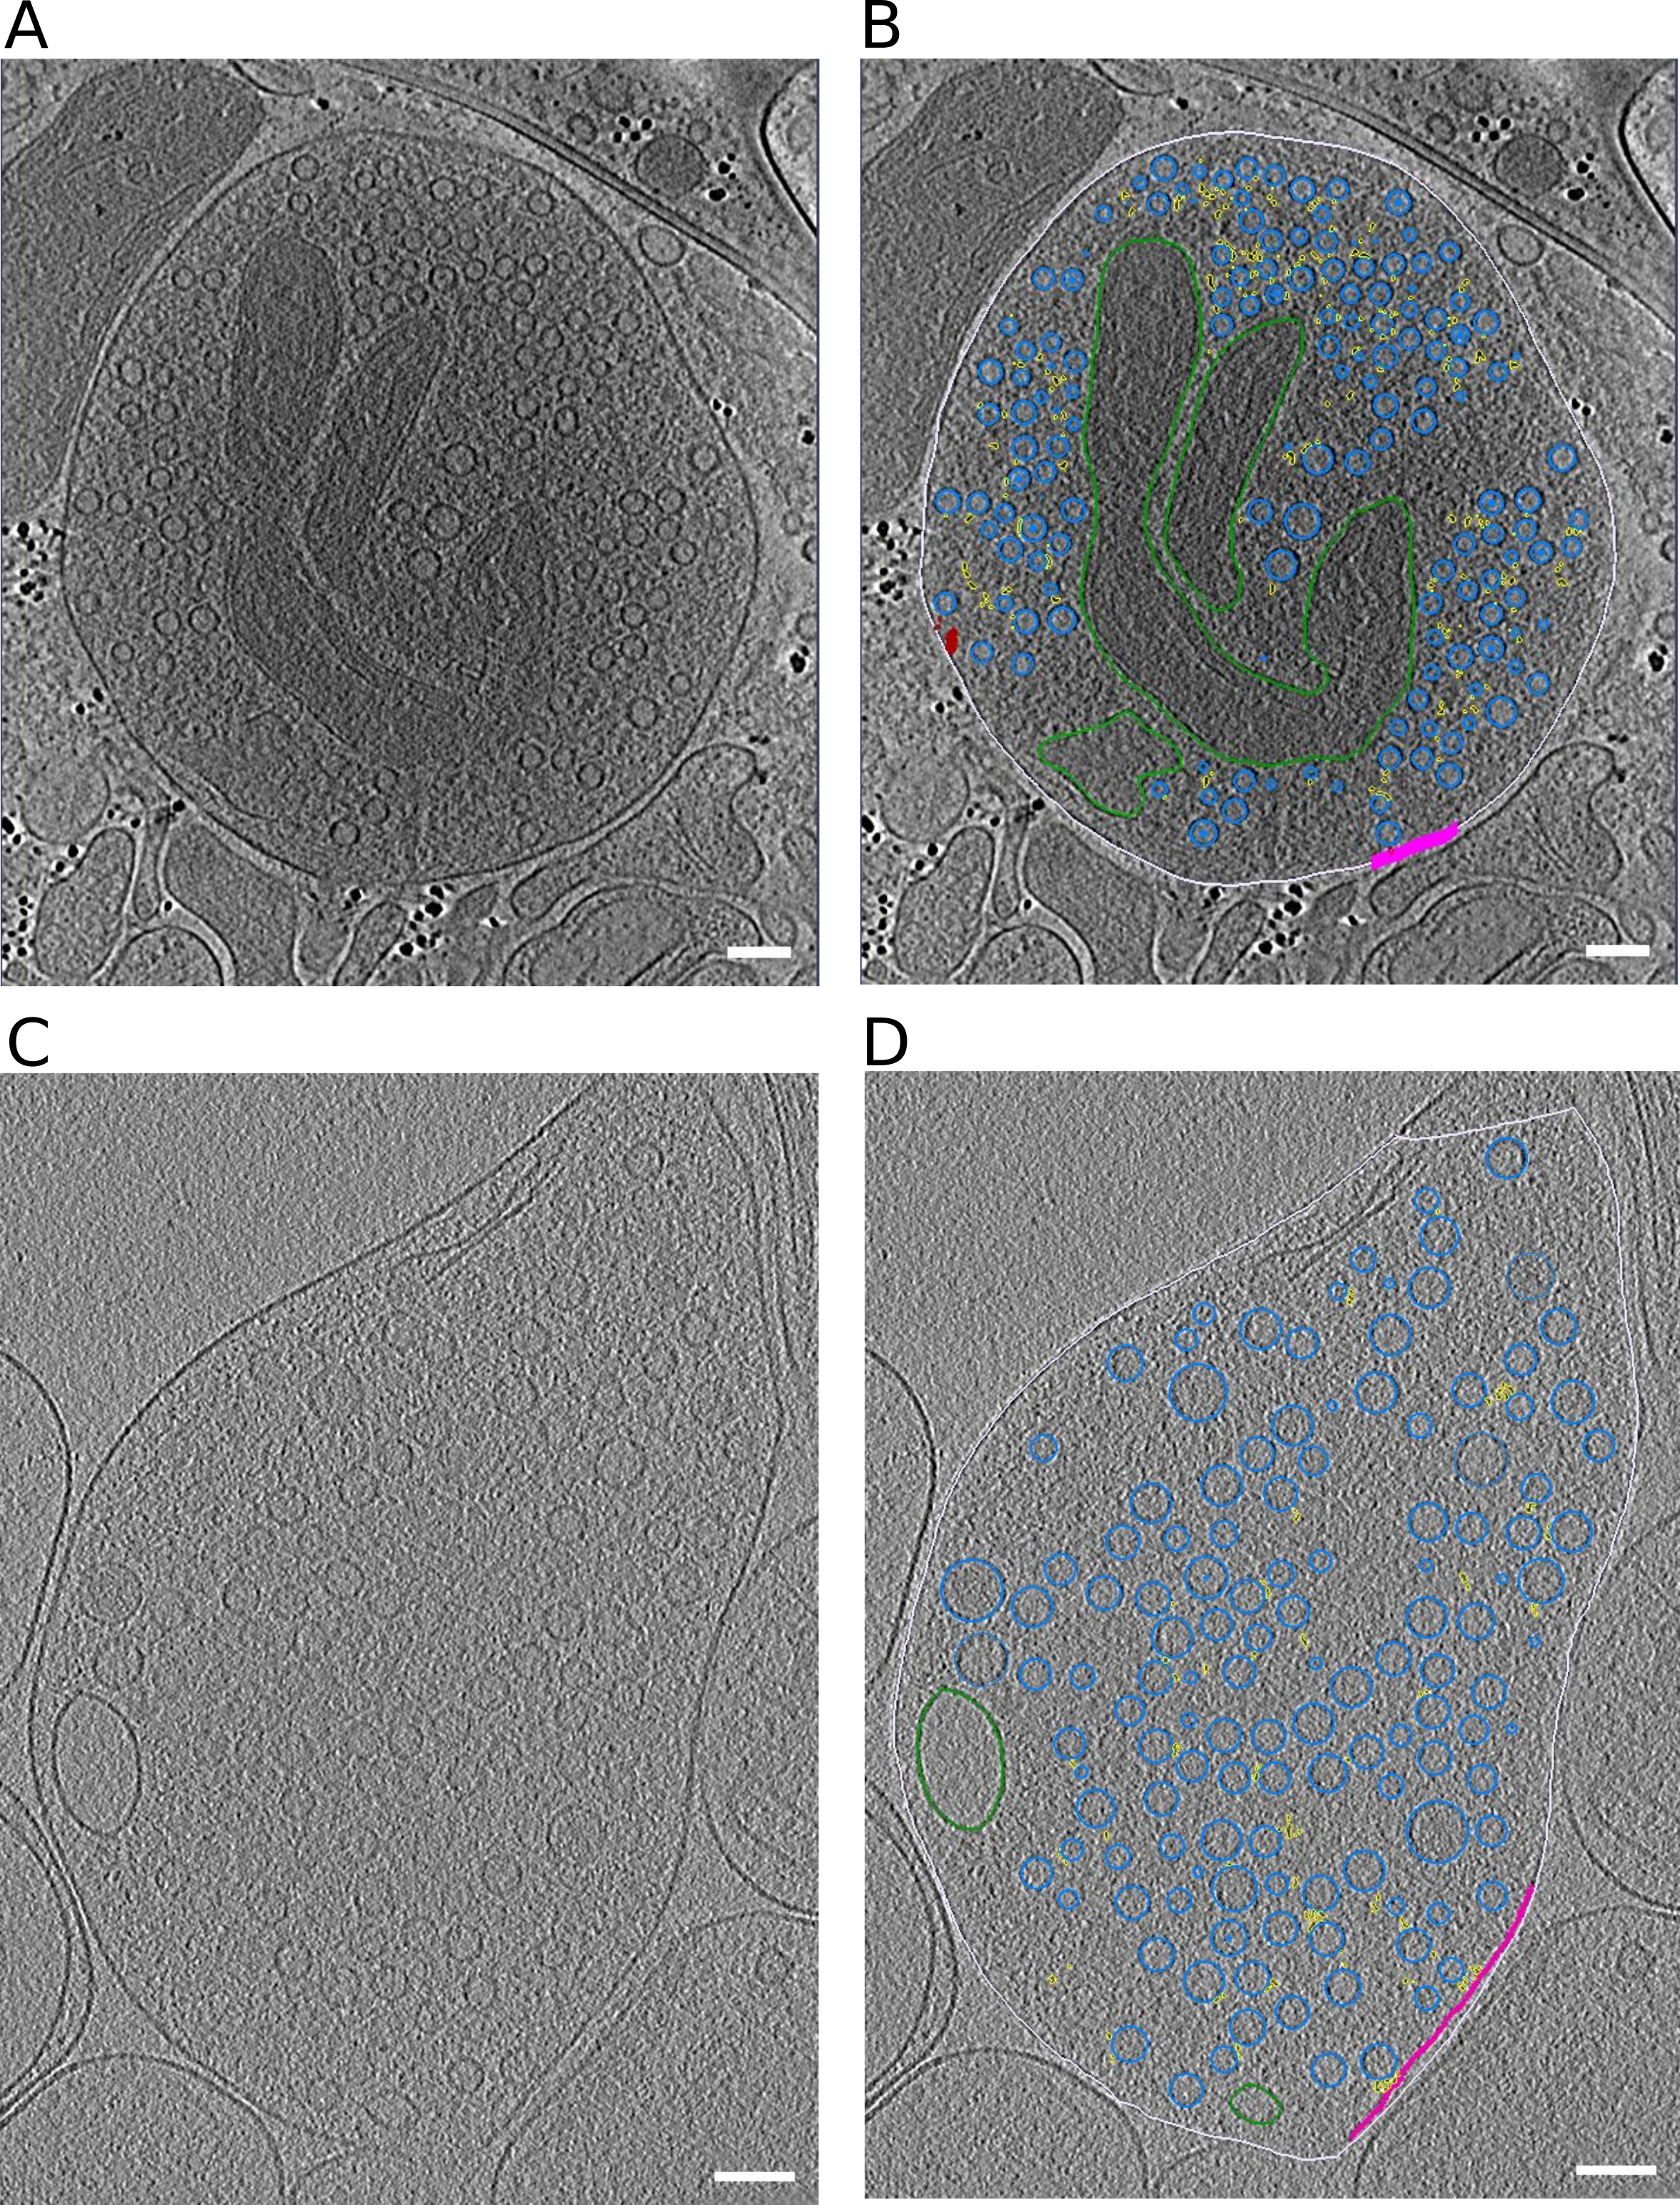 Figure S1: Representative slices through tomograms. (A, B) Tomographic slice without (A) and with (B) segmentation of synaptosome with late fusion events. (C,D) Tomographic slice without (C) and with (D) segmentation of WT SNAP-25 neurons. Segmentation colors: off-white = cell outline; pink = active zone; blue = synaptic vesicles; green = mitochondria; yellow = connectors, red = tethers. Scale bar, 100 nm.